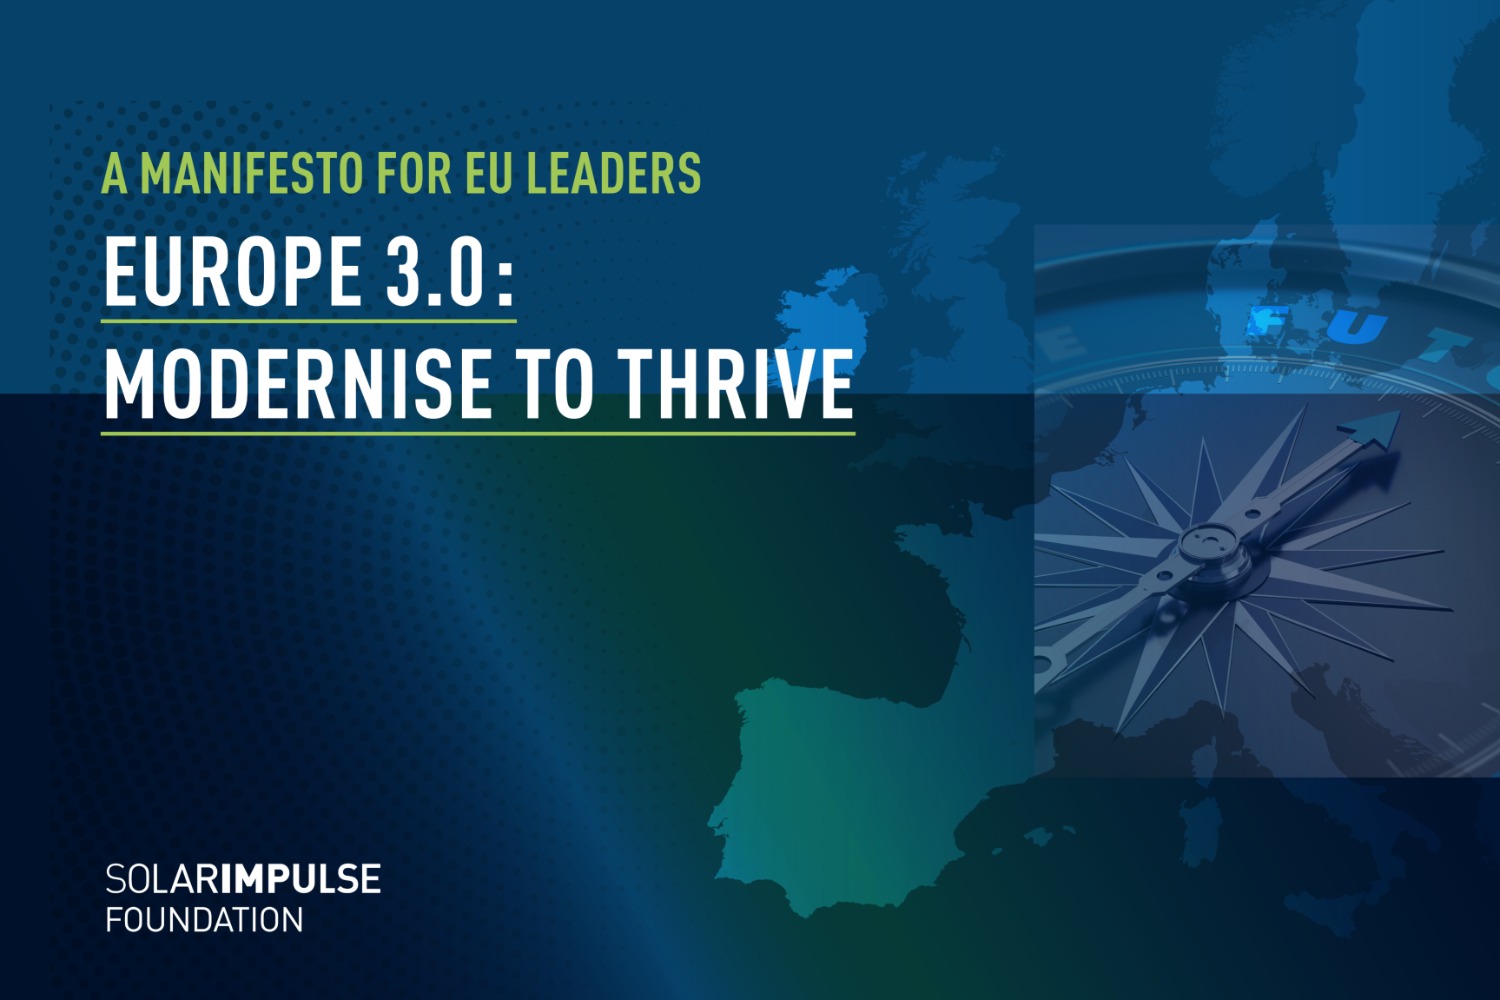 Europe 3.0 - Modernise to Thrive